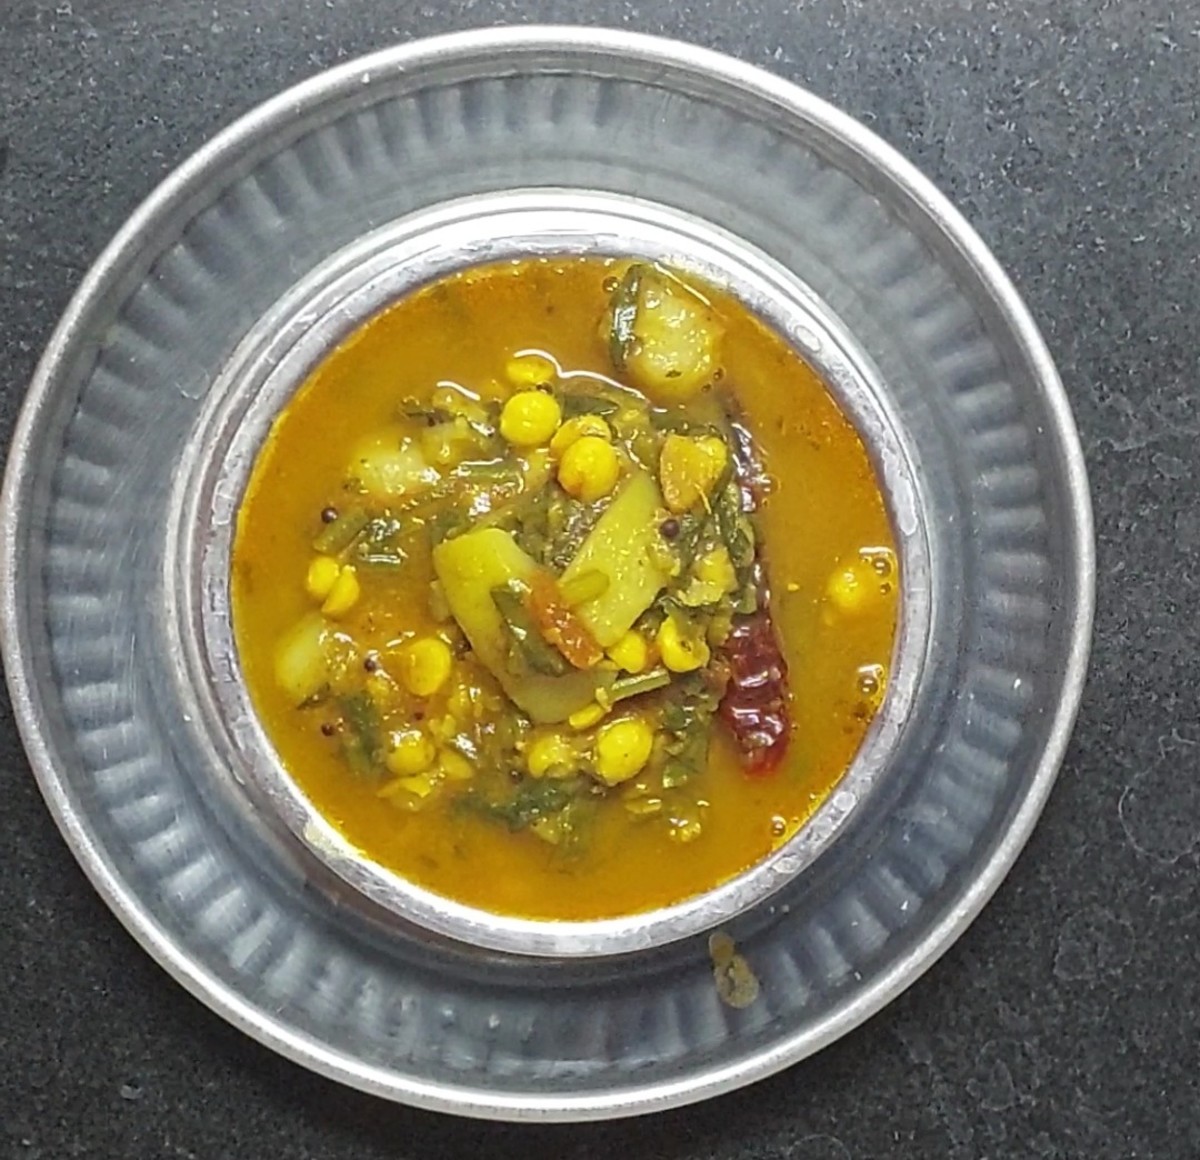 Easy and tasty bottle gourd-spinach dal is ready to sreve. Serve hot with rice, chapati or roti and enjoy.